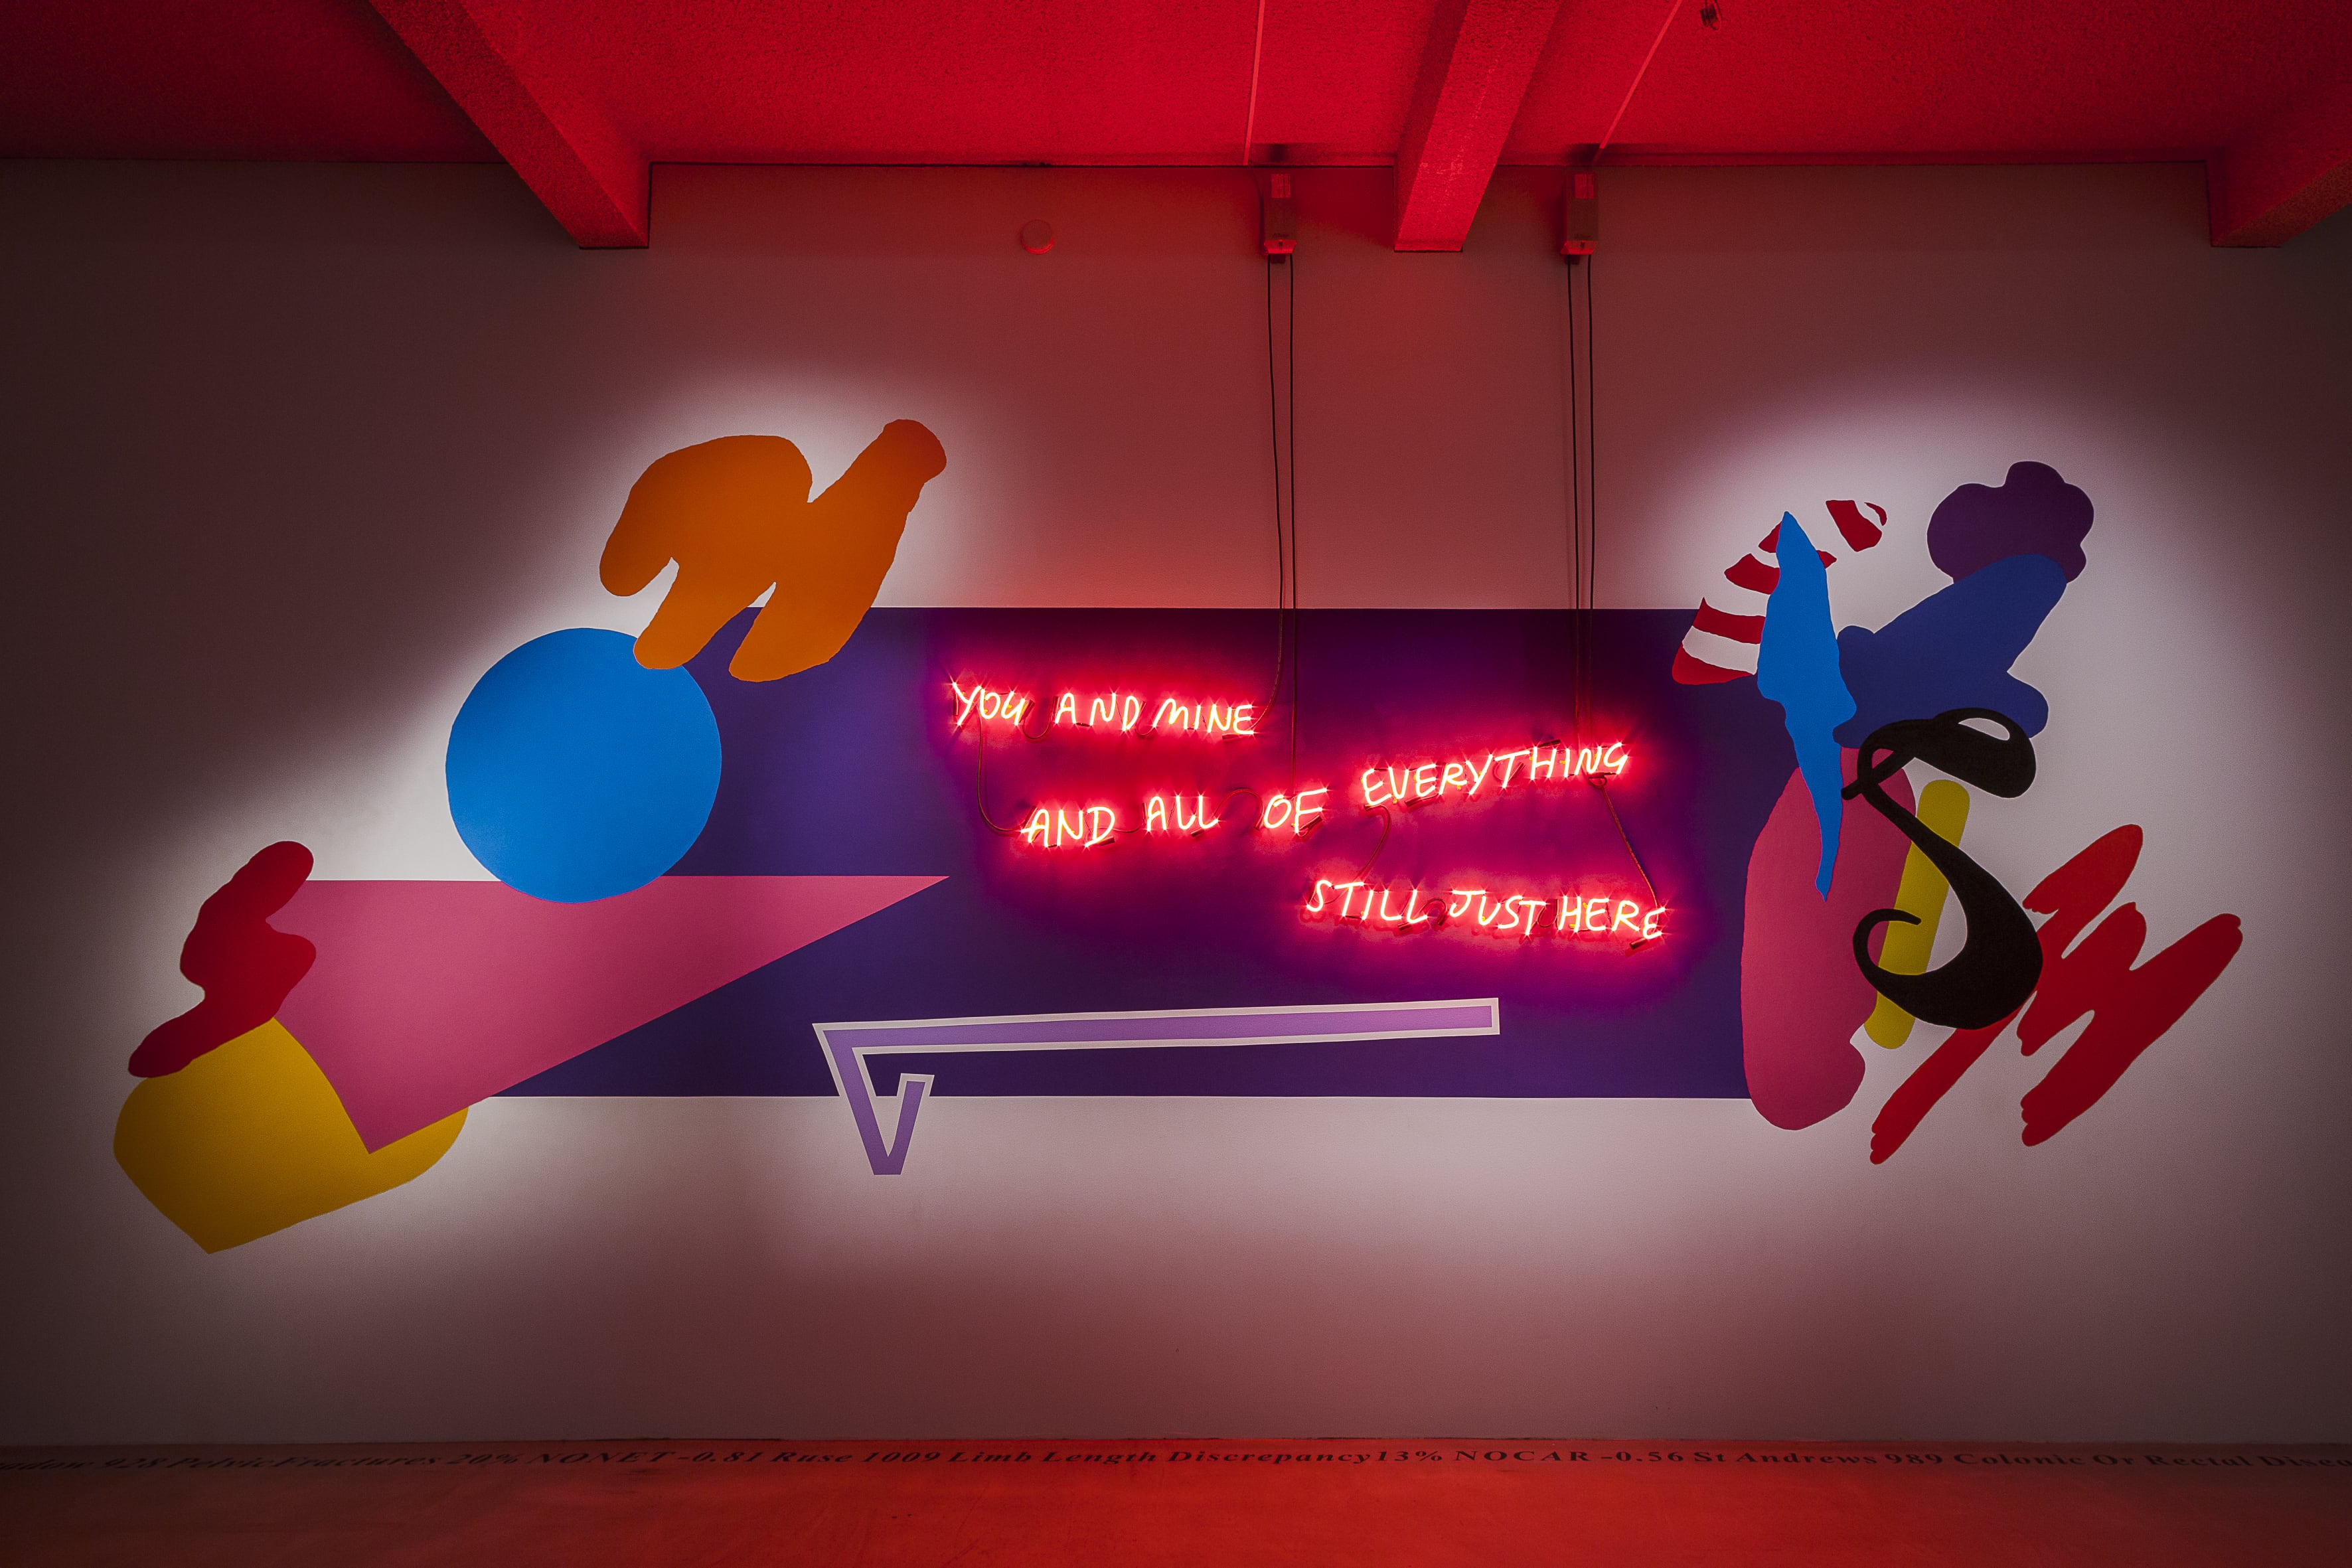 Image 03: Tom Polo *STILL JUST HERE* 2017, fluorescent neon on wall painting. Image courtesy the artist and STATION, Melbourne. Commissioned by Campbelltown Arts Centre. Photo credit: Document Photography.